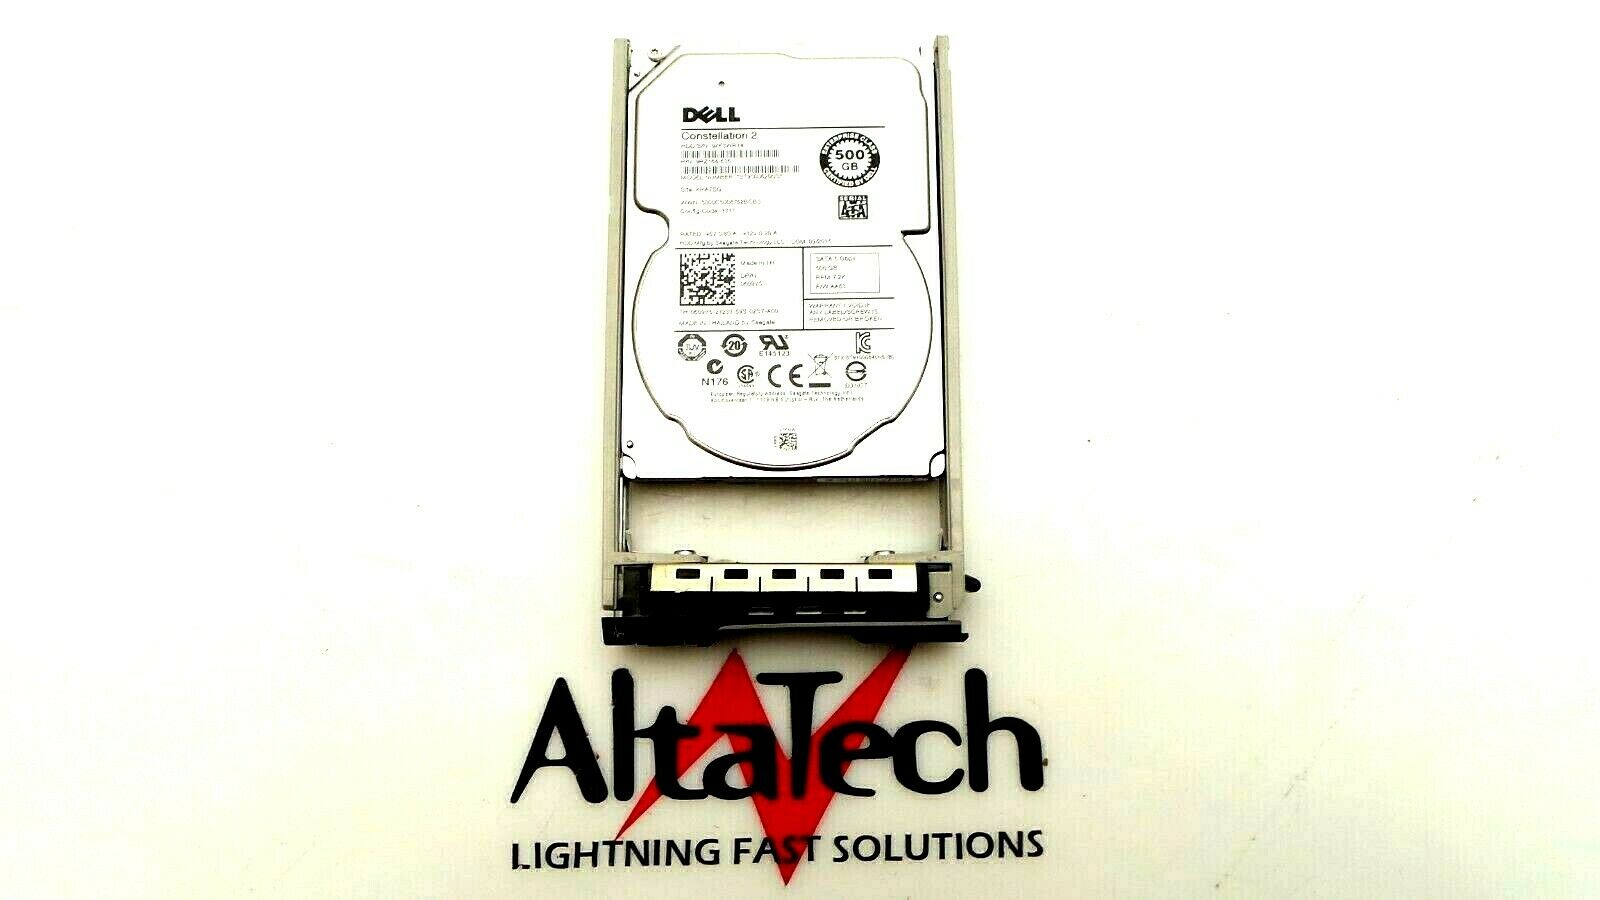 Seagate ST9500620NS Seagate ST9500620NS 500GB 7.2K SATA 2.5" 6G HDD Dell 9RZ164-636 Hard Disc Drive, Used